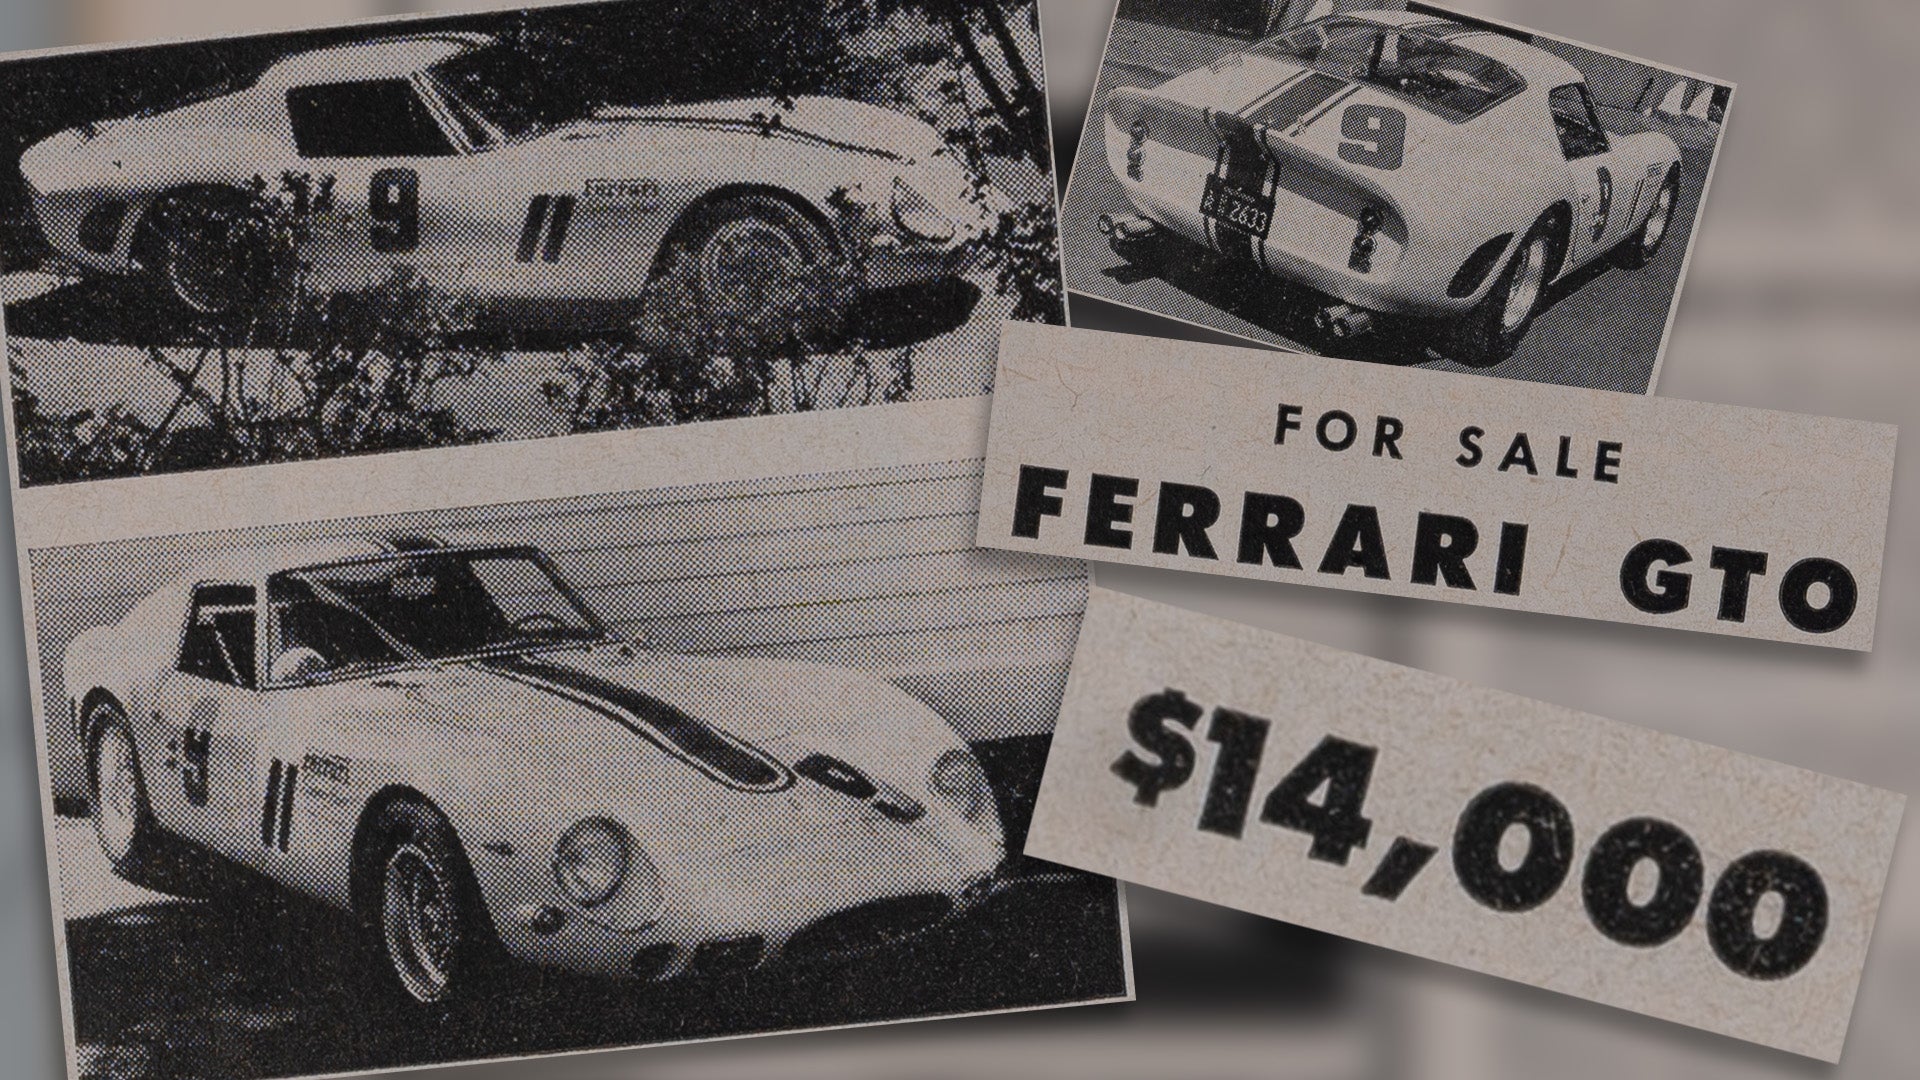 This $14,000 Ferrari 250 GTO Ad Is Real. Here’s What Happened to the Car